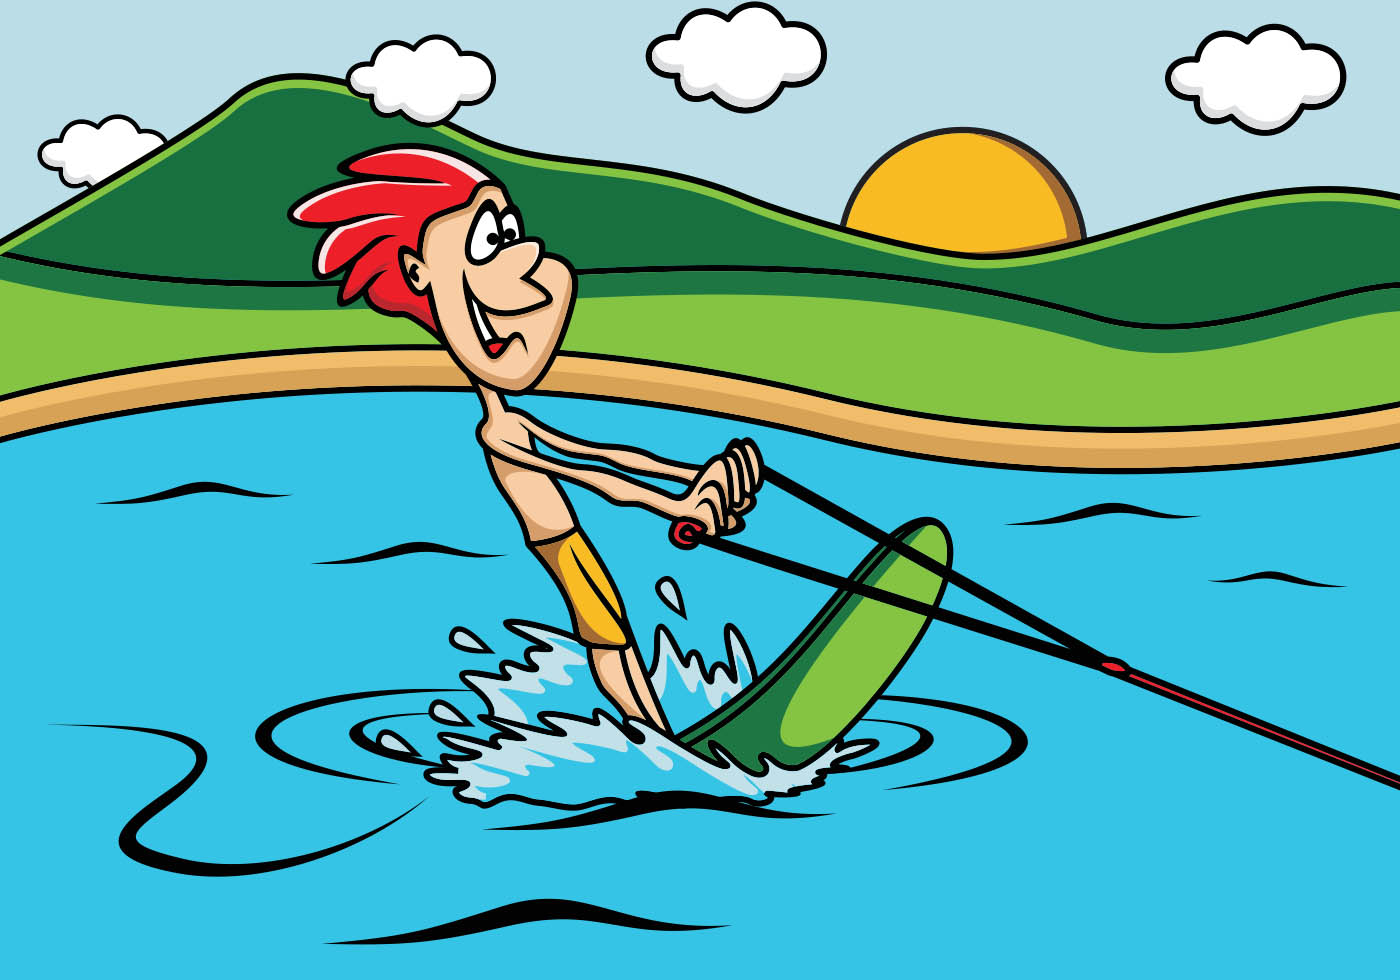 Download the Guy Playing Water Skiing In The Lake 131348